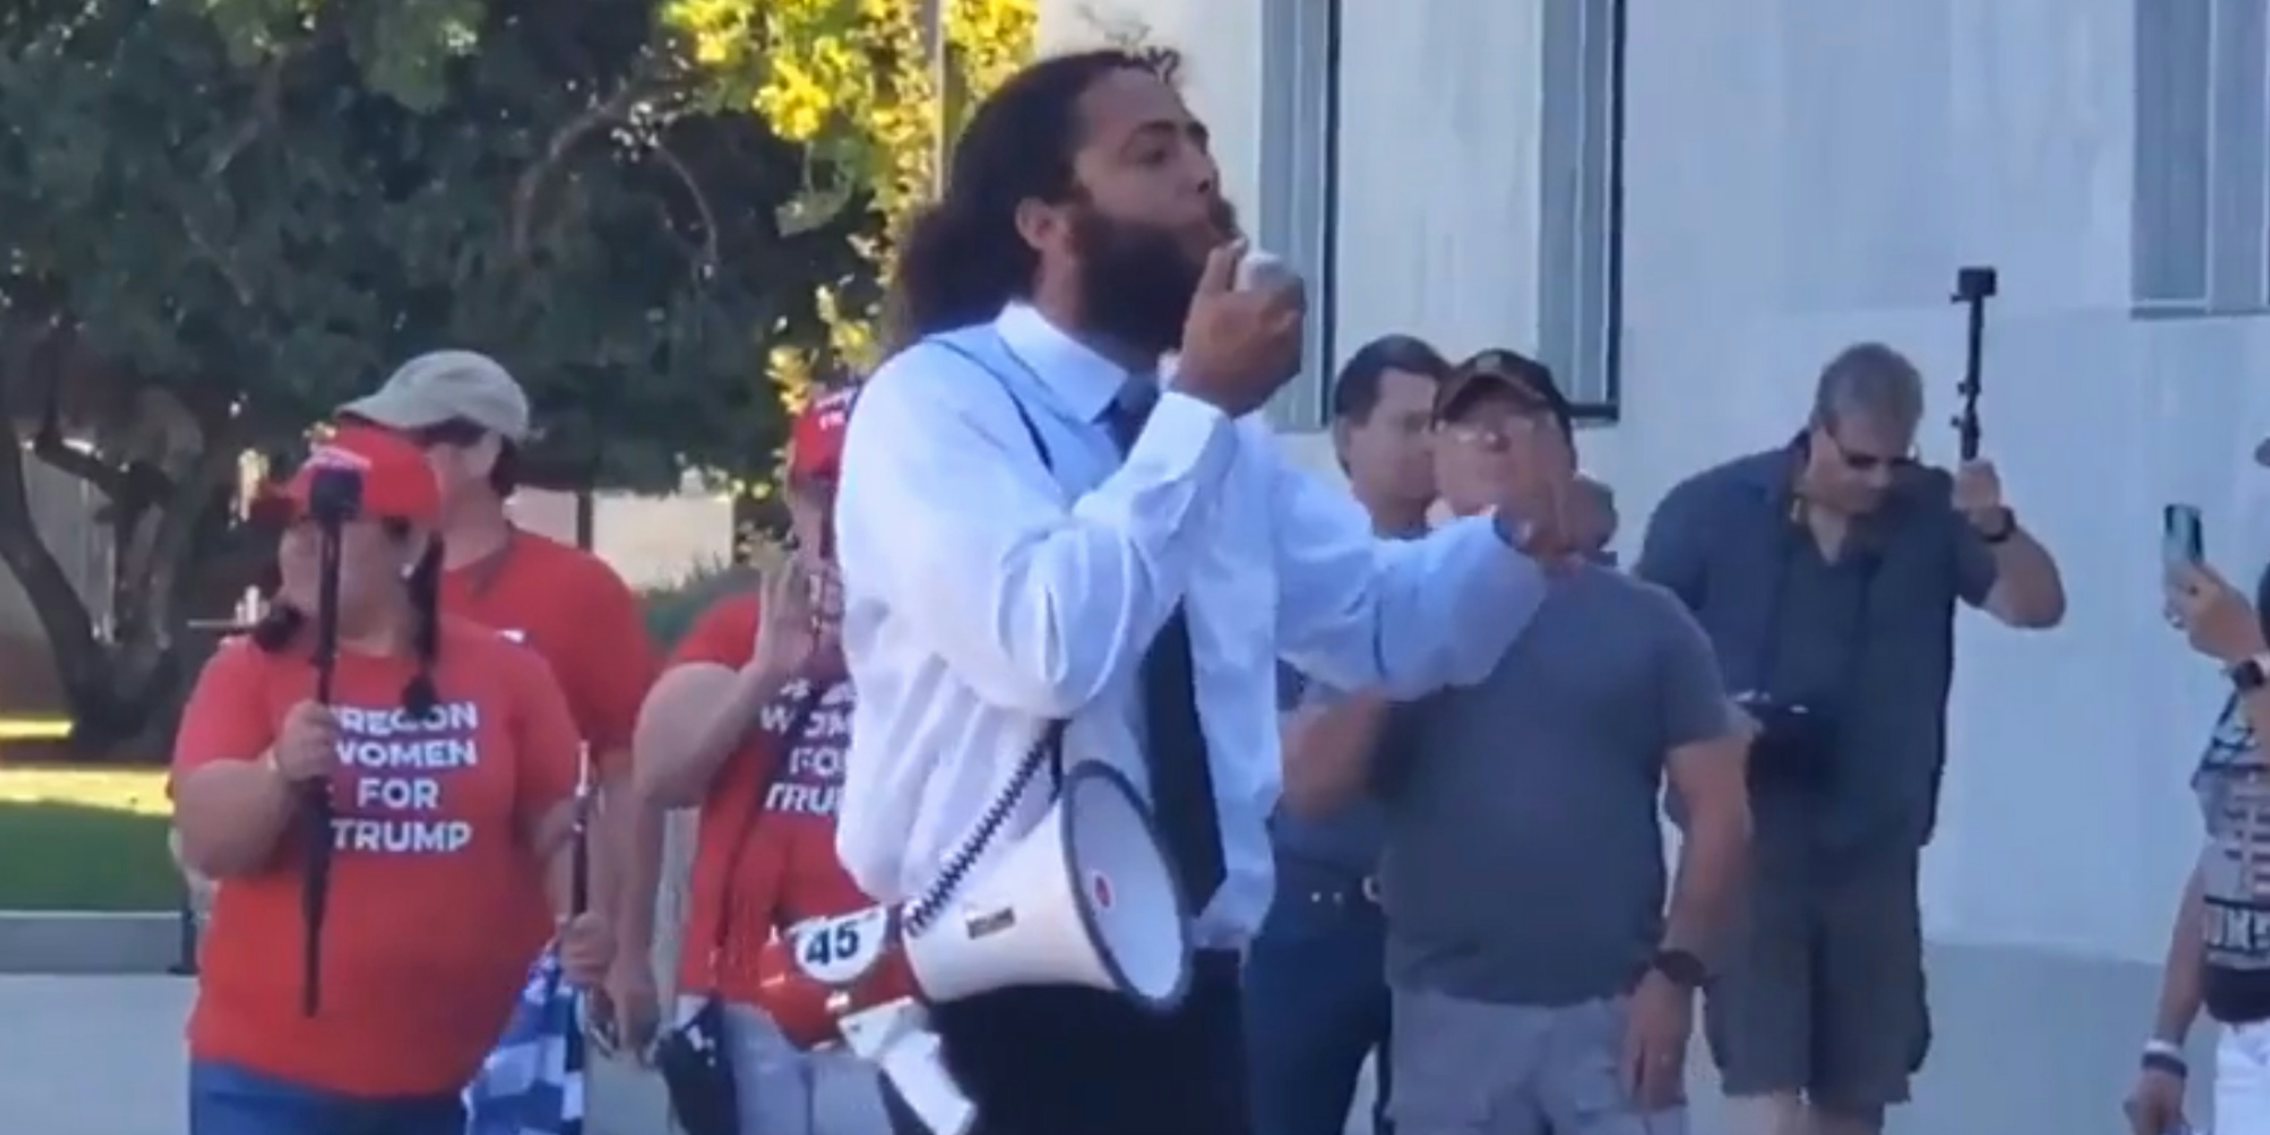 trump preacher on megaphone calls for democrats to be shot dead in the street